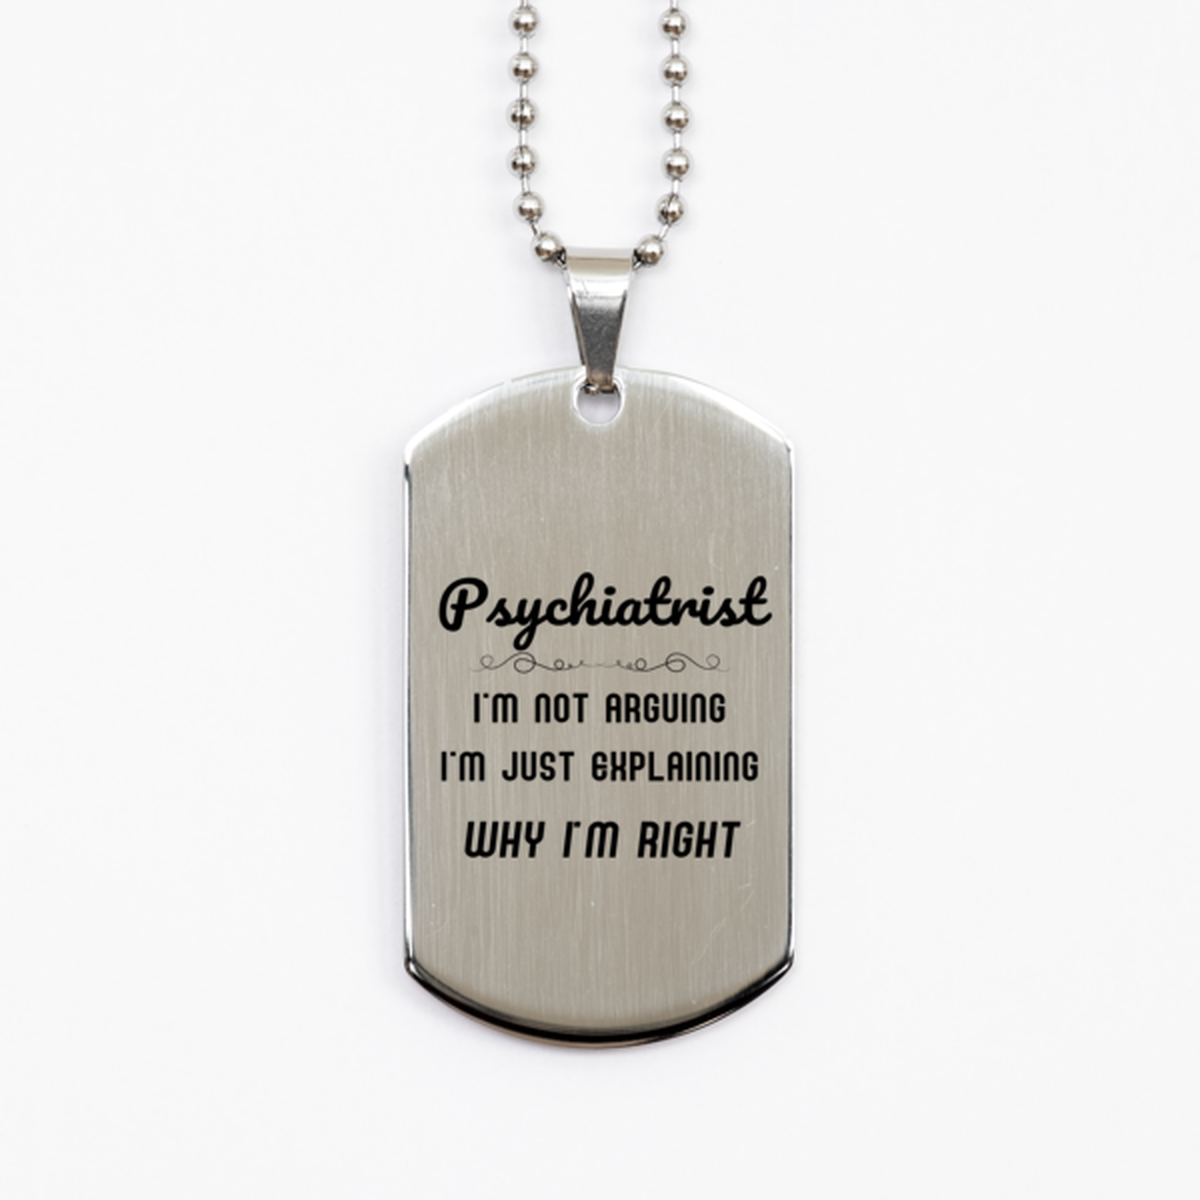 Psychiatrist I'm not Arguing. I'm Just Explaining Why I'm RIGHT Silver Dog Tag, Funny Saying Quote Psychiatrist Gifts For Psychiatrist Graduation Birthday Christmas Gifts for Men Women Coworker